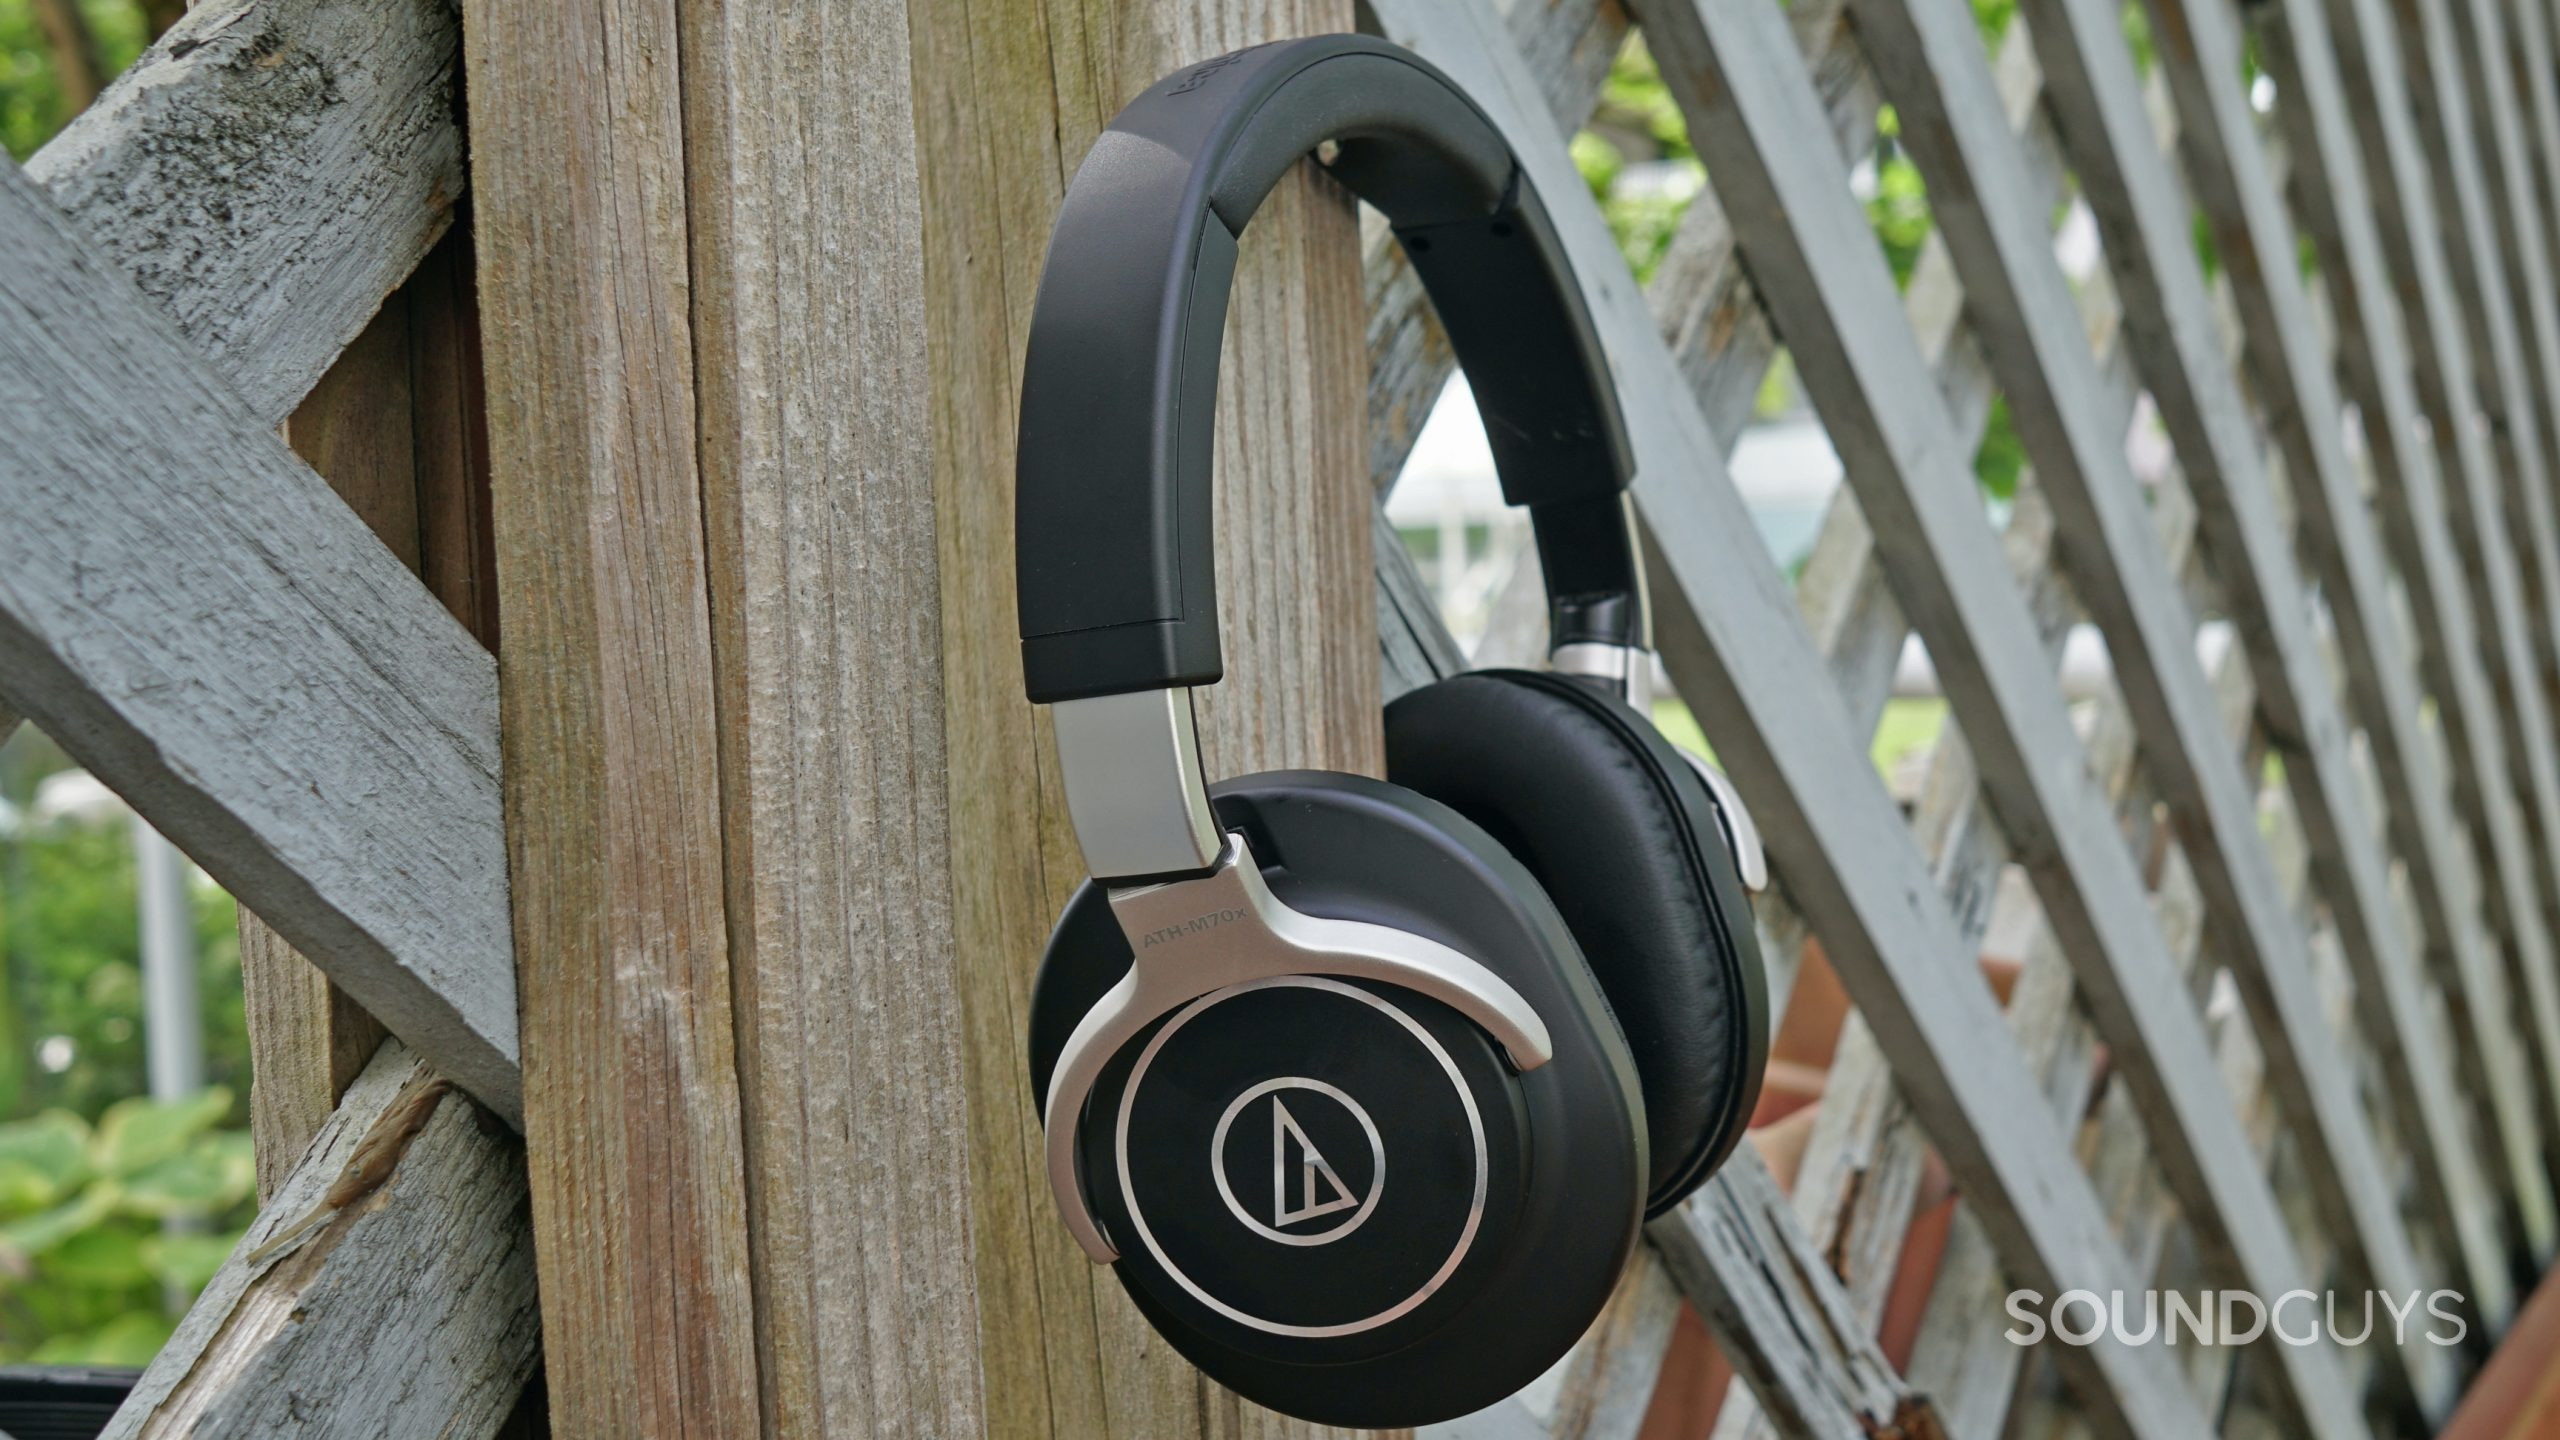 The Audio-Technica ATH-M70x hangs on a wooden lattice fence outside.